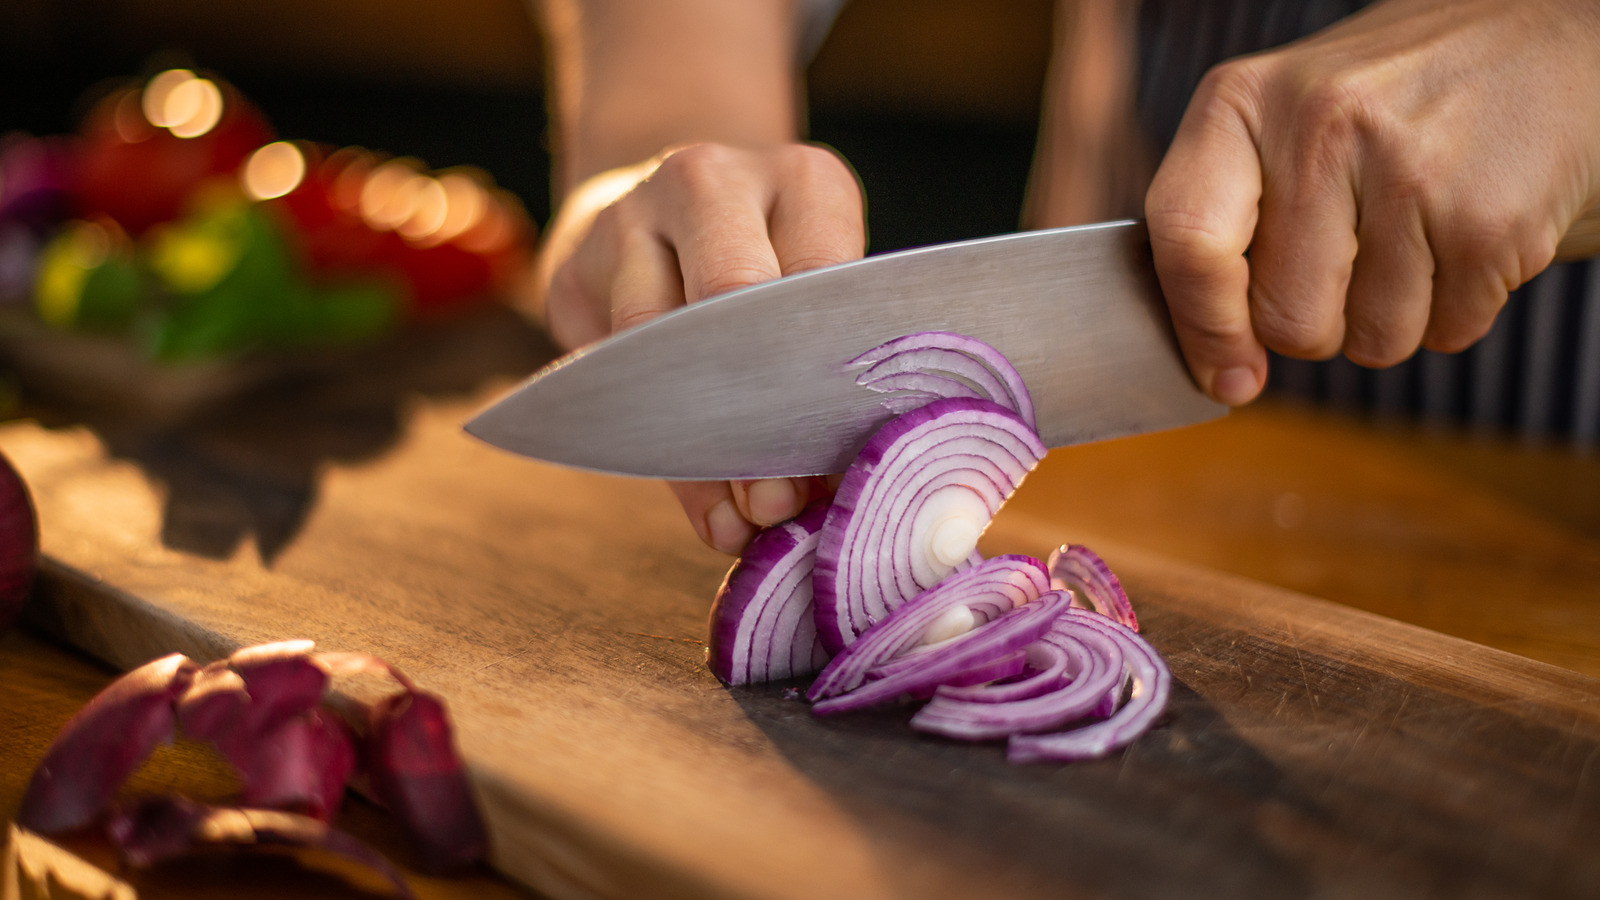 How To PreseRVe Cut Onions Without Refrigerator